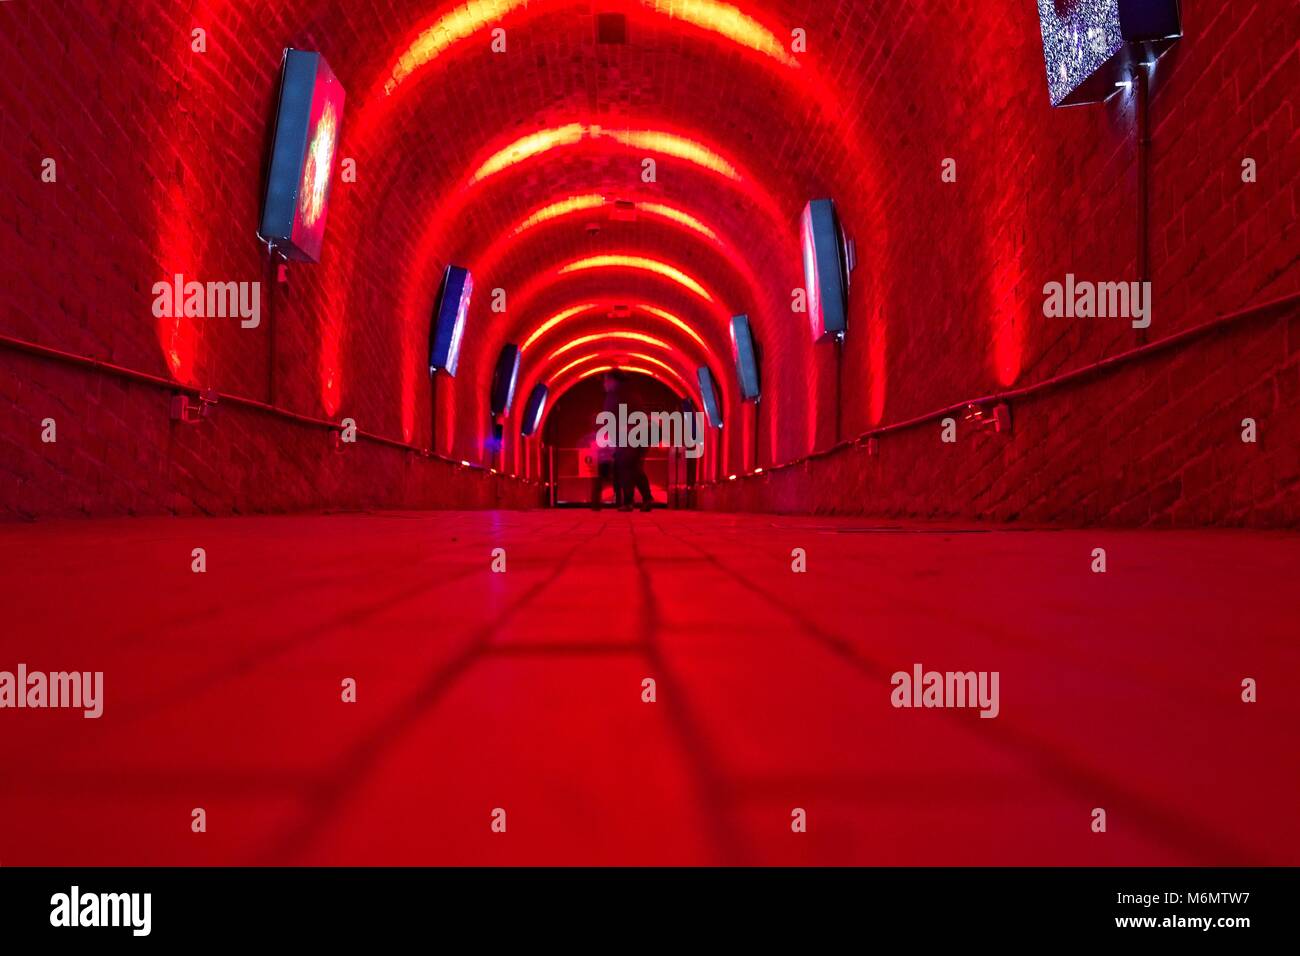 Red corridor with blueish artwork. View from the floor level. Two people at the far end. Stock Photo